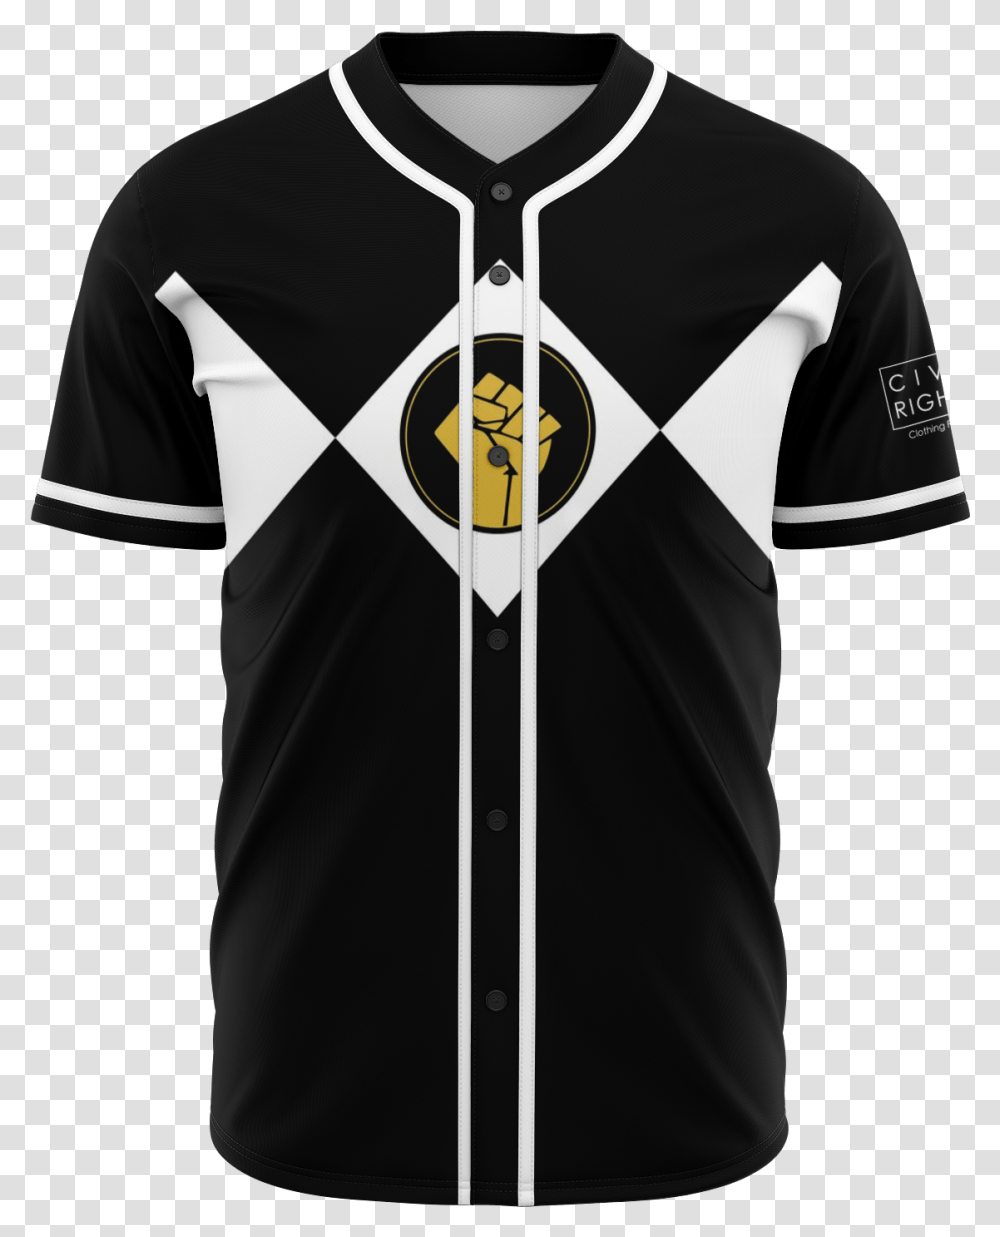 Black Power Fist Malcolm X Black Panther Party Baseball Baseball Shirts Bonnie And Clyde, Clothing, Apparel, Jersey, Sleeve Transparent Png